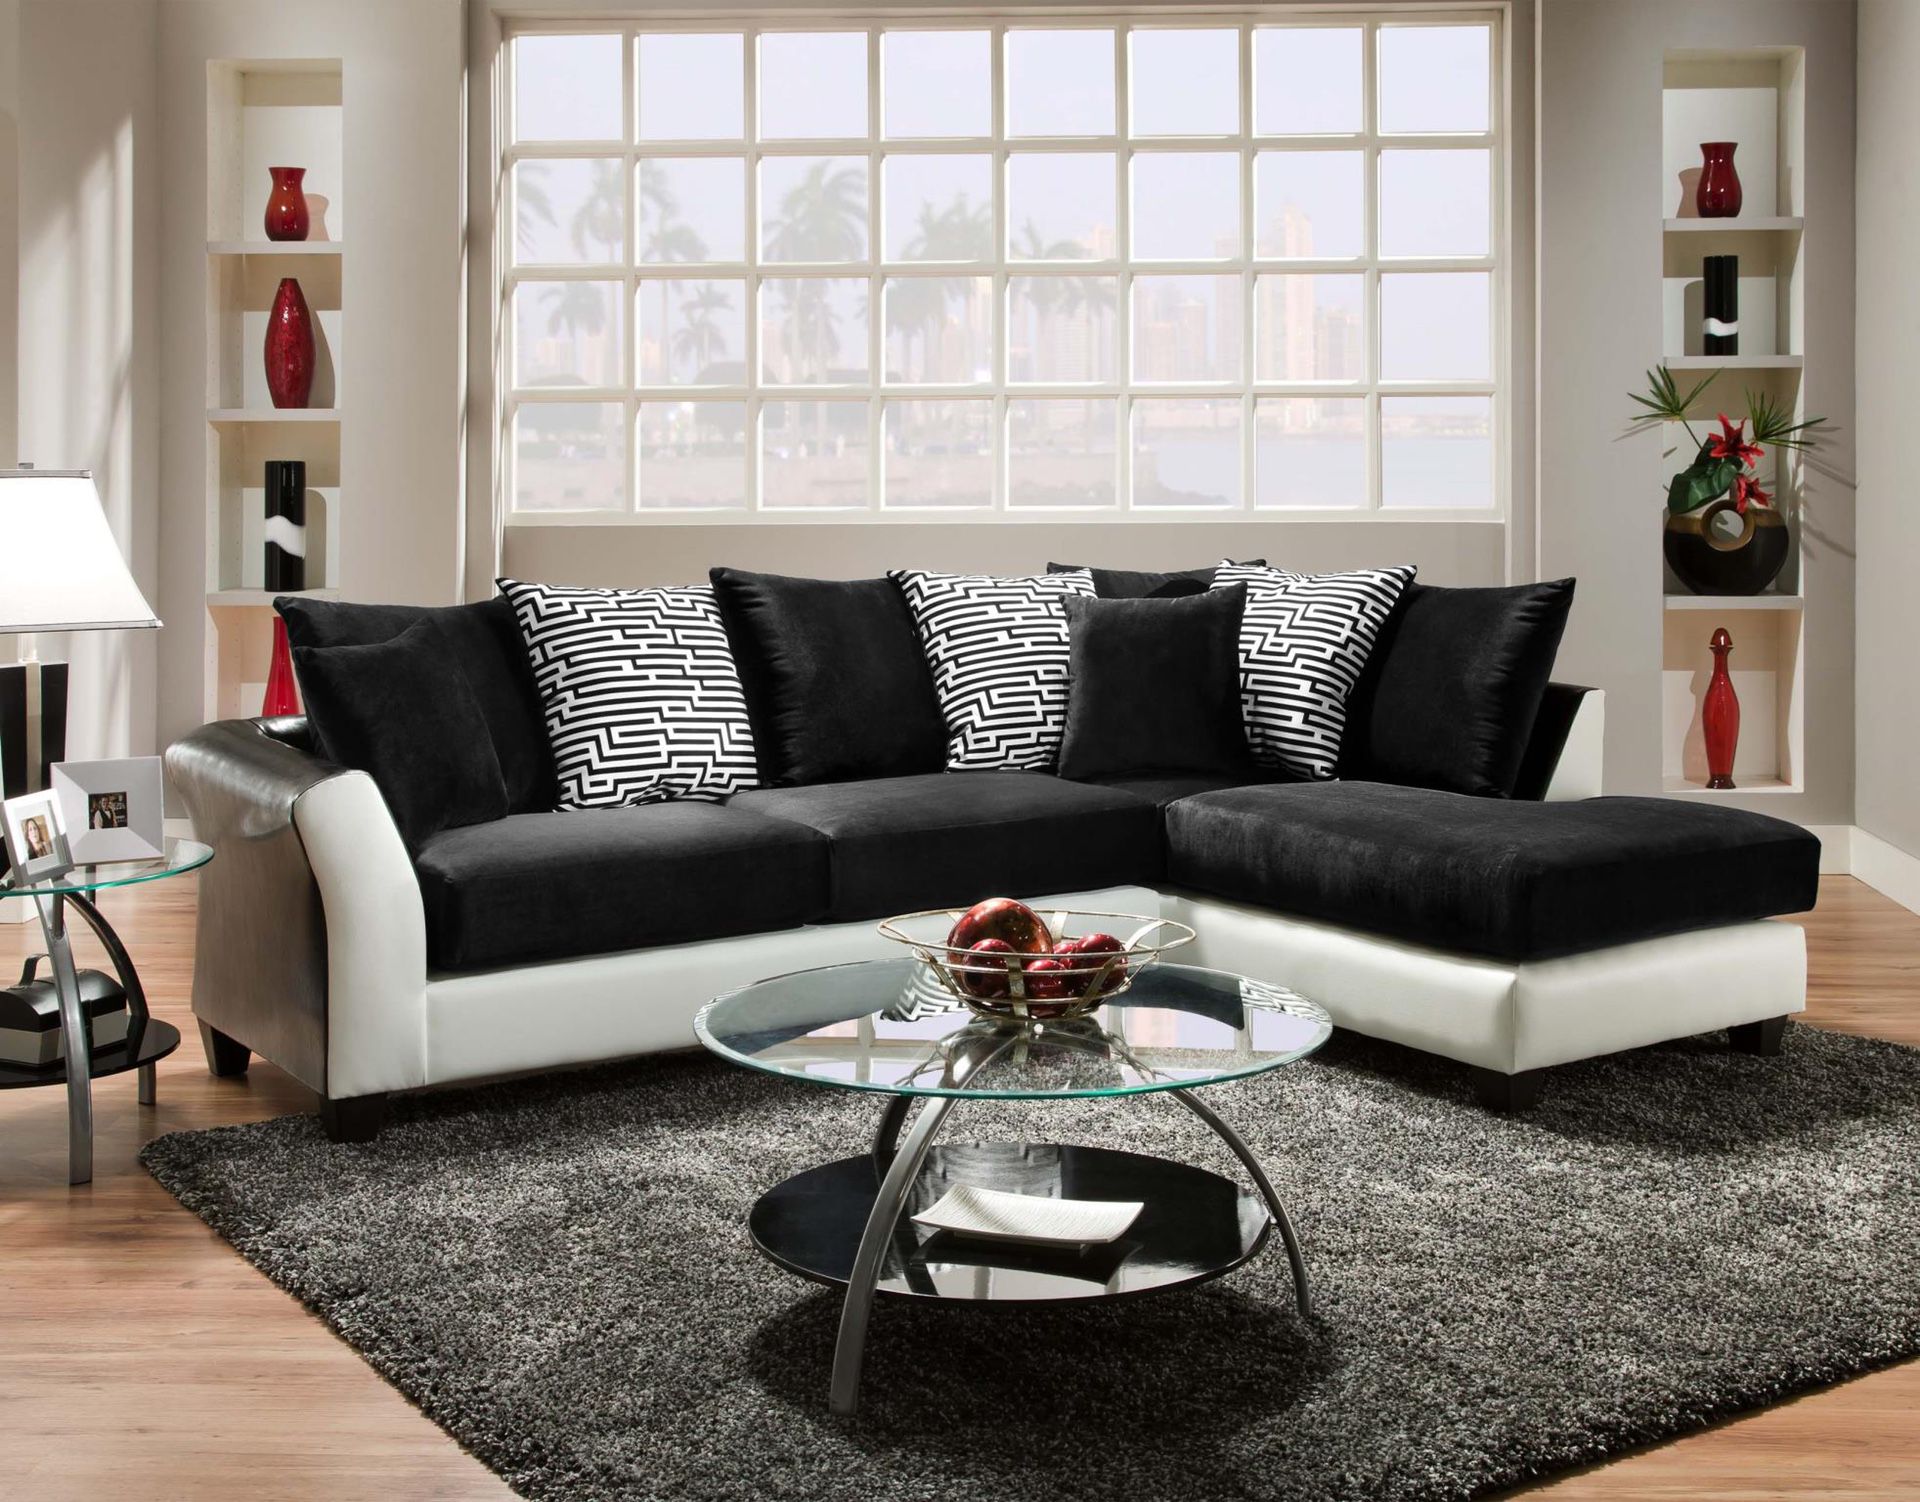 Black and white sectional